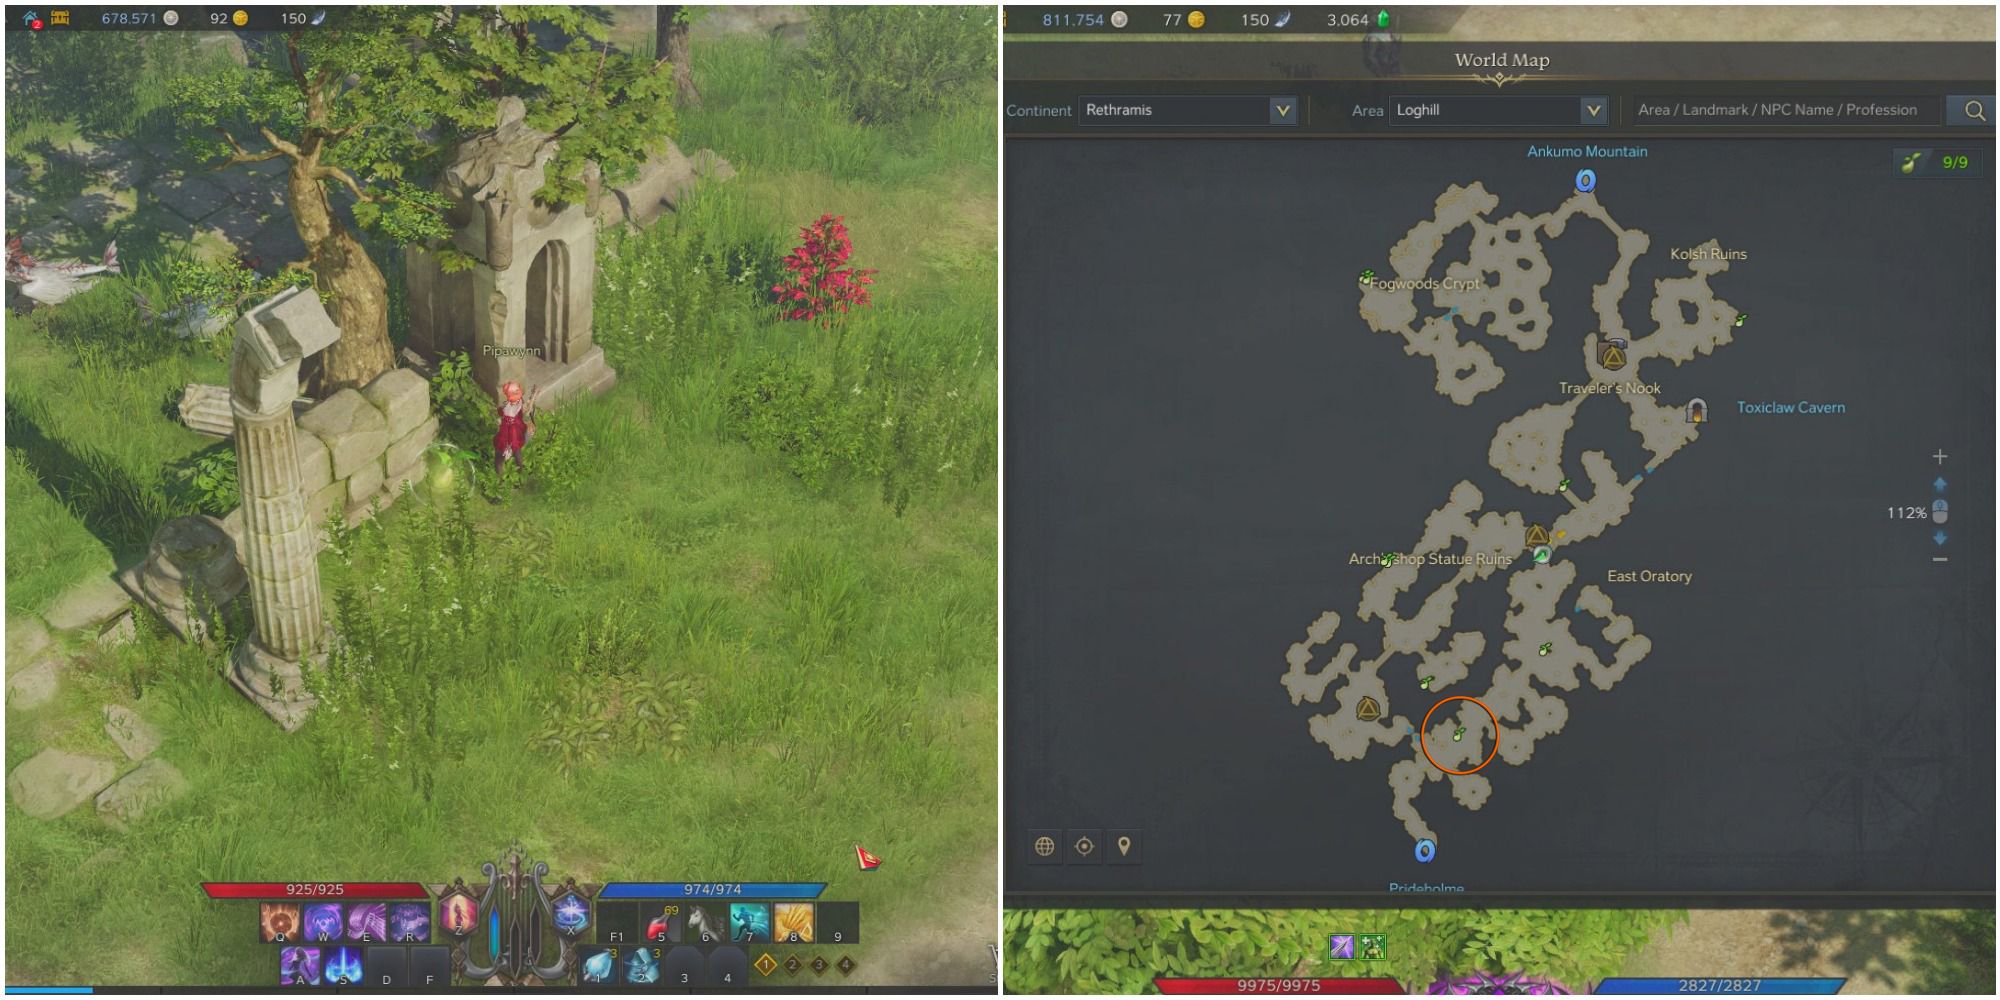 A split image of a bards standing in front of ruins and a mokoko seed, and a map of Loghill